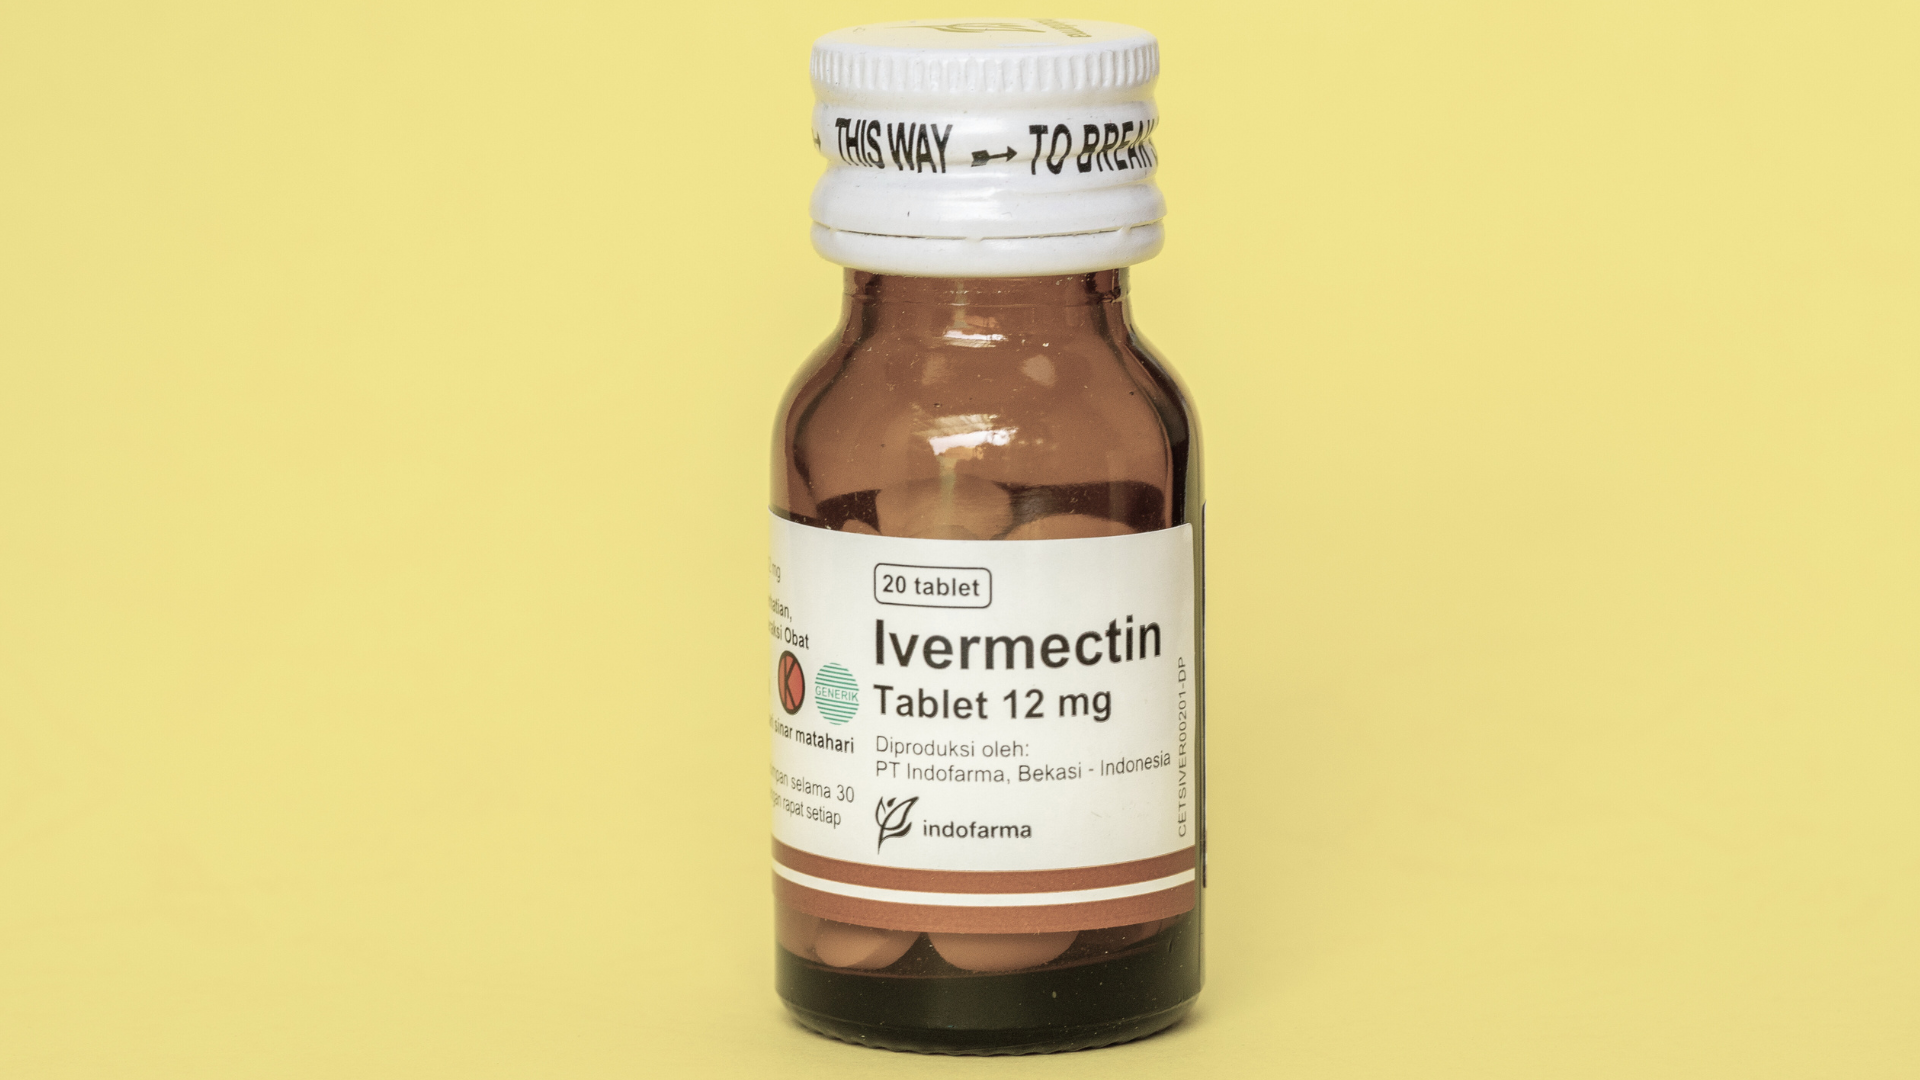 Why Ivermectin Had to Be Destroyed